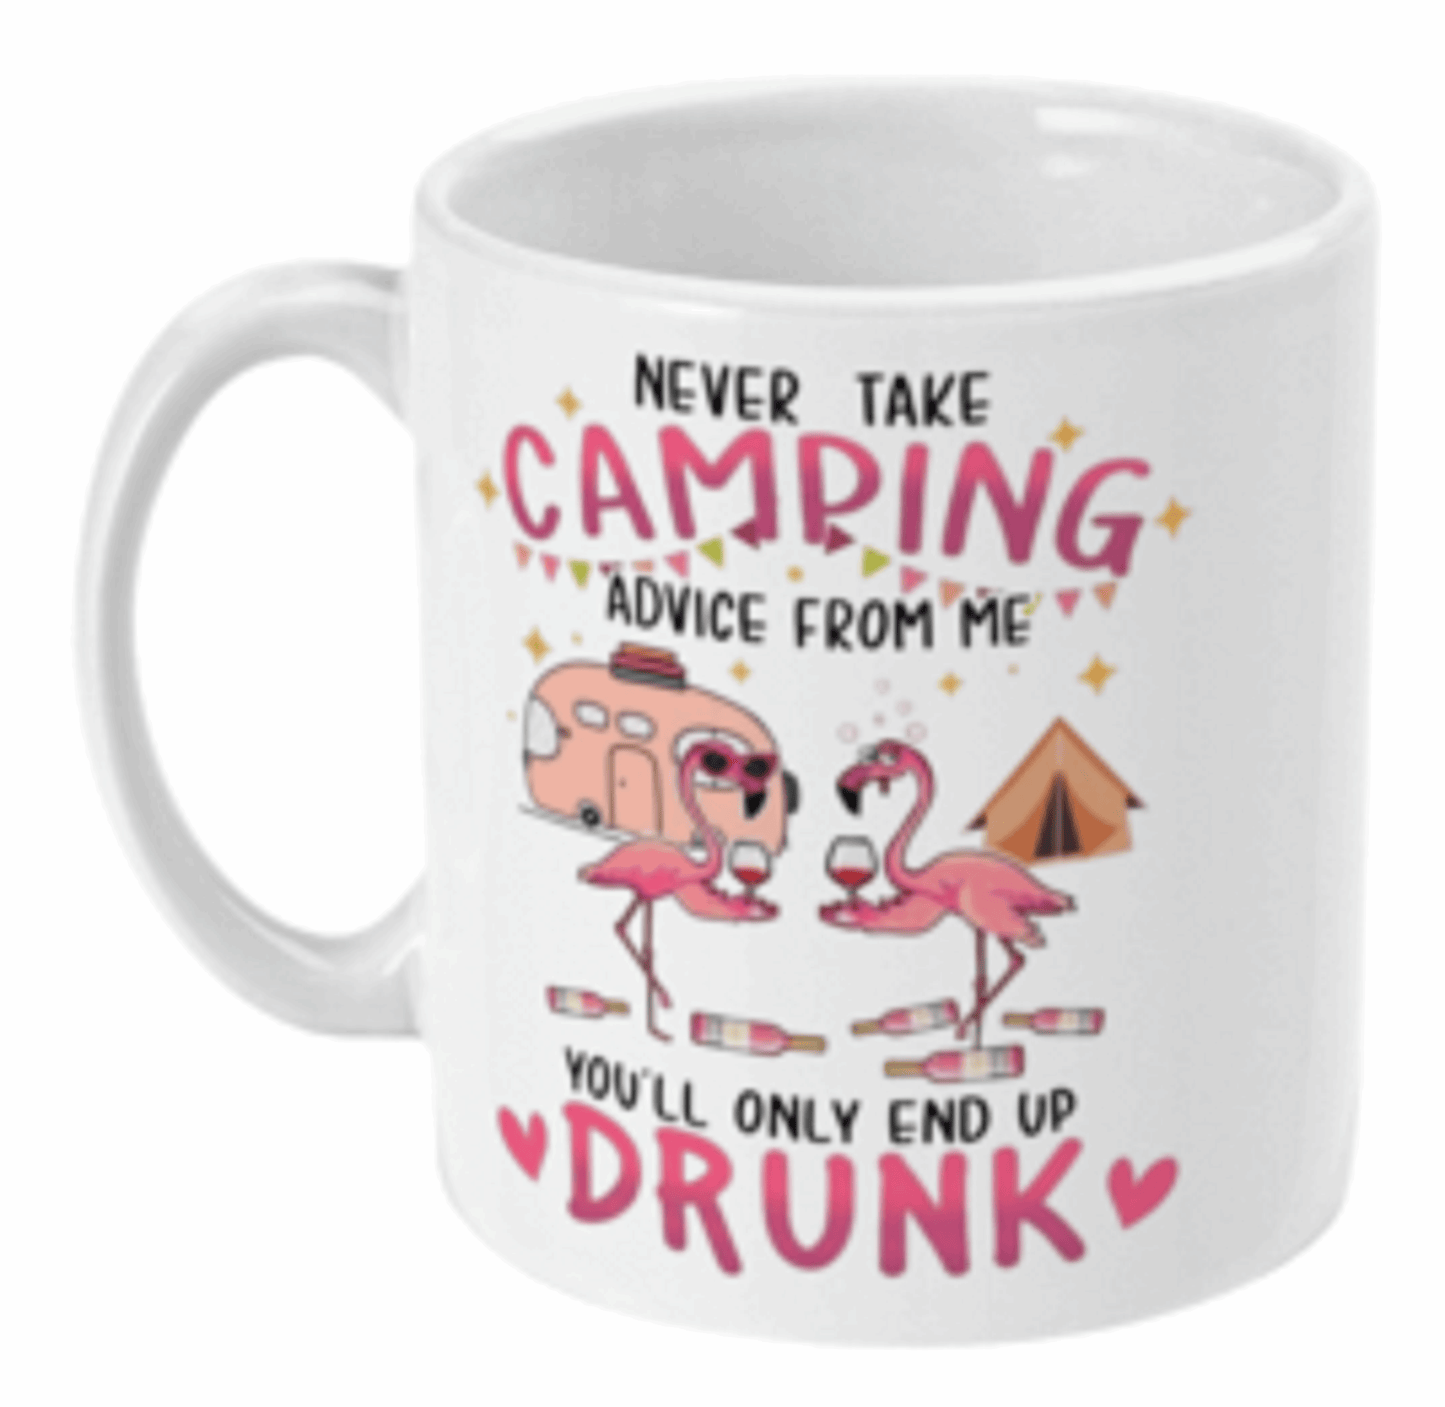  Don't Take Camping Advice From Me Coffee Mug by Free Spirit Accessories sold by Free Spirit Accessories